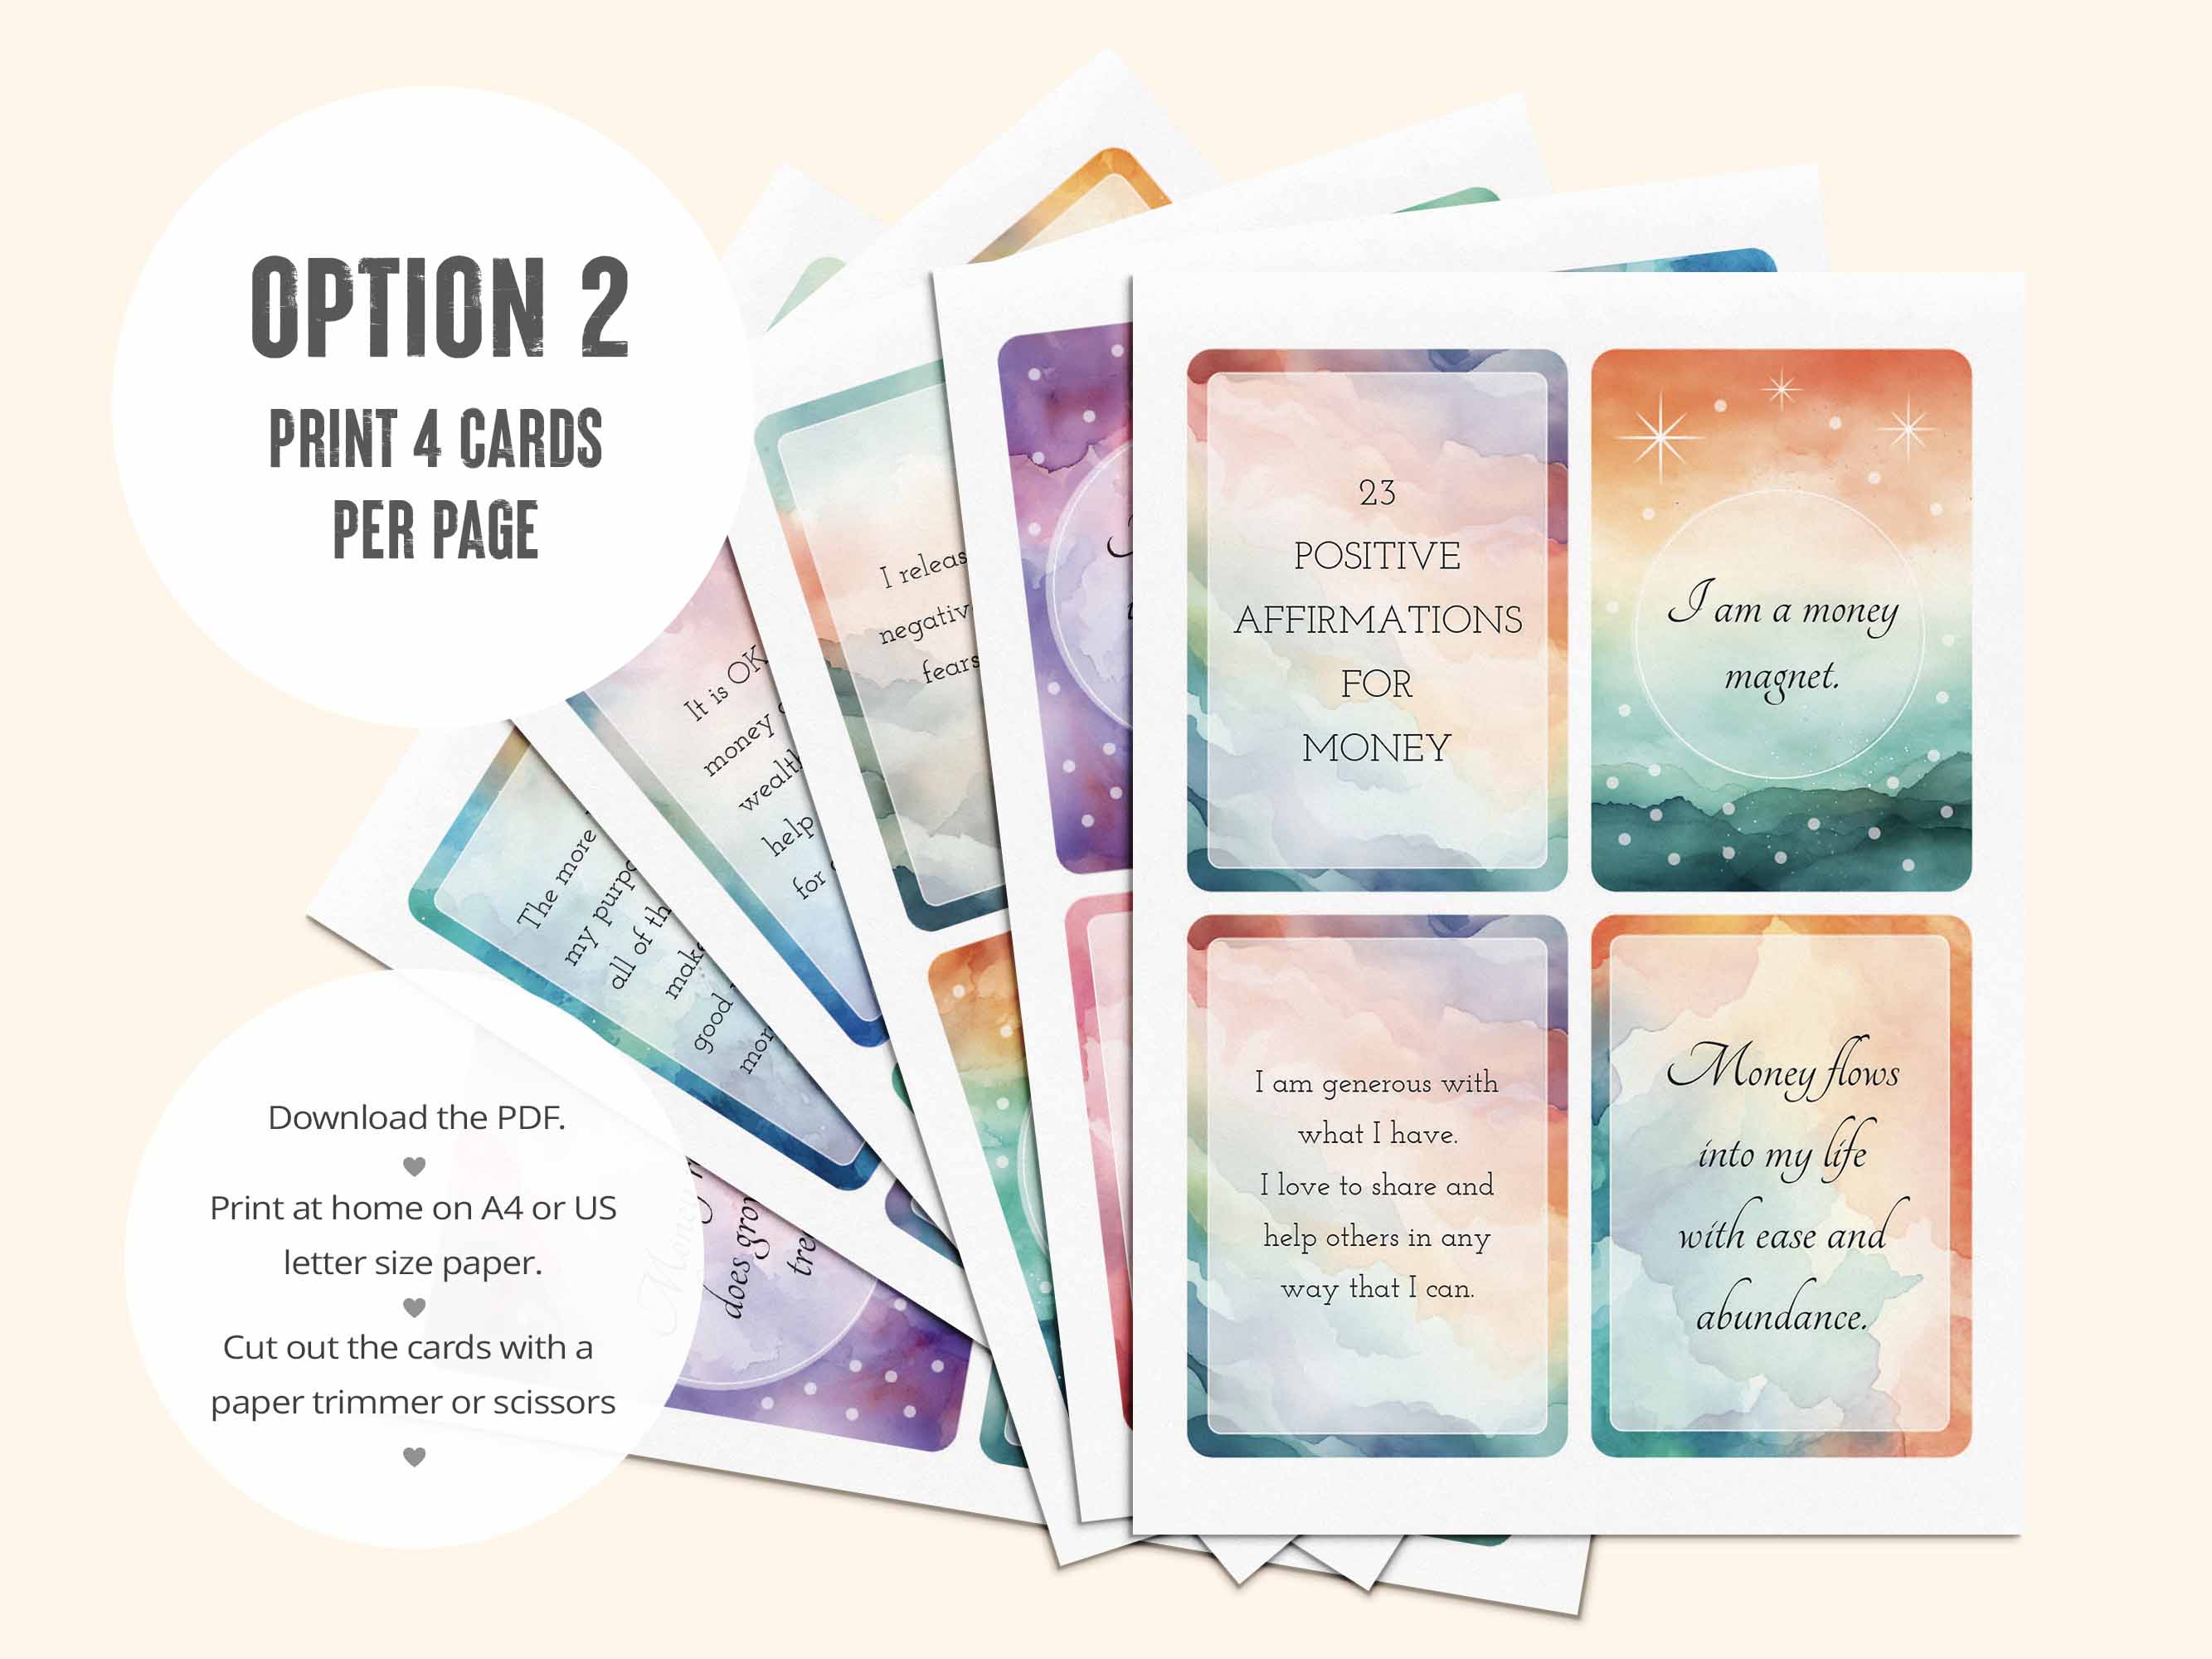 The second PDF has all 23 money affirmations laid out 4 per page.